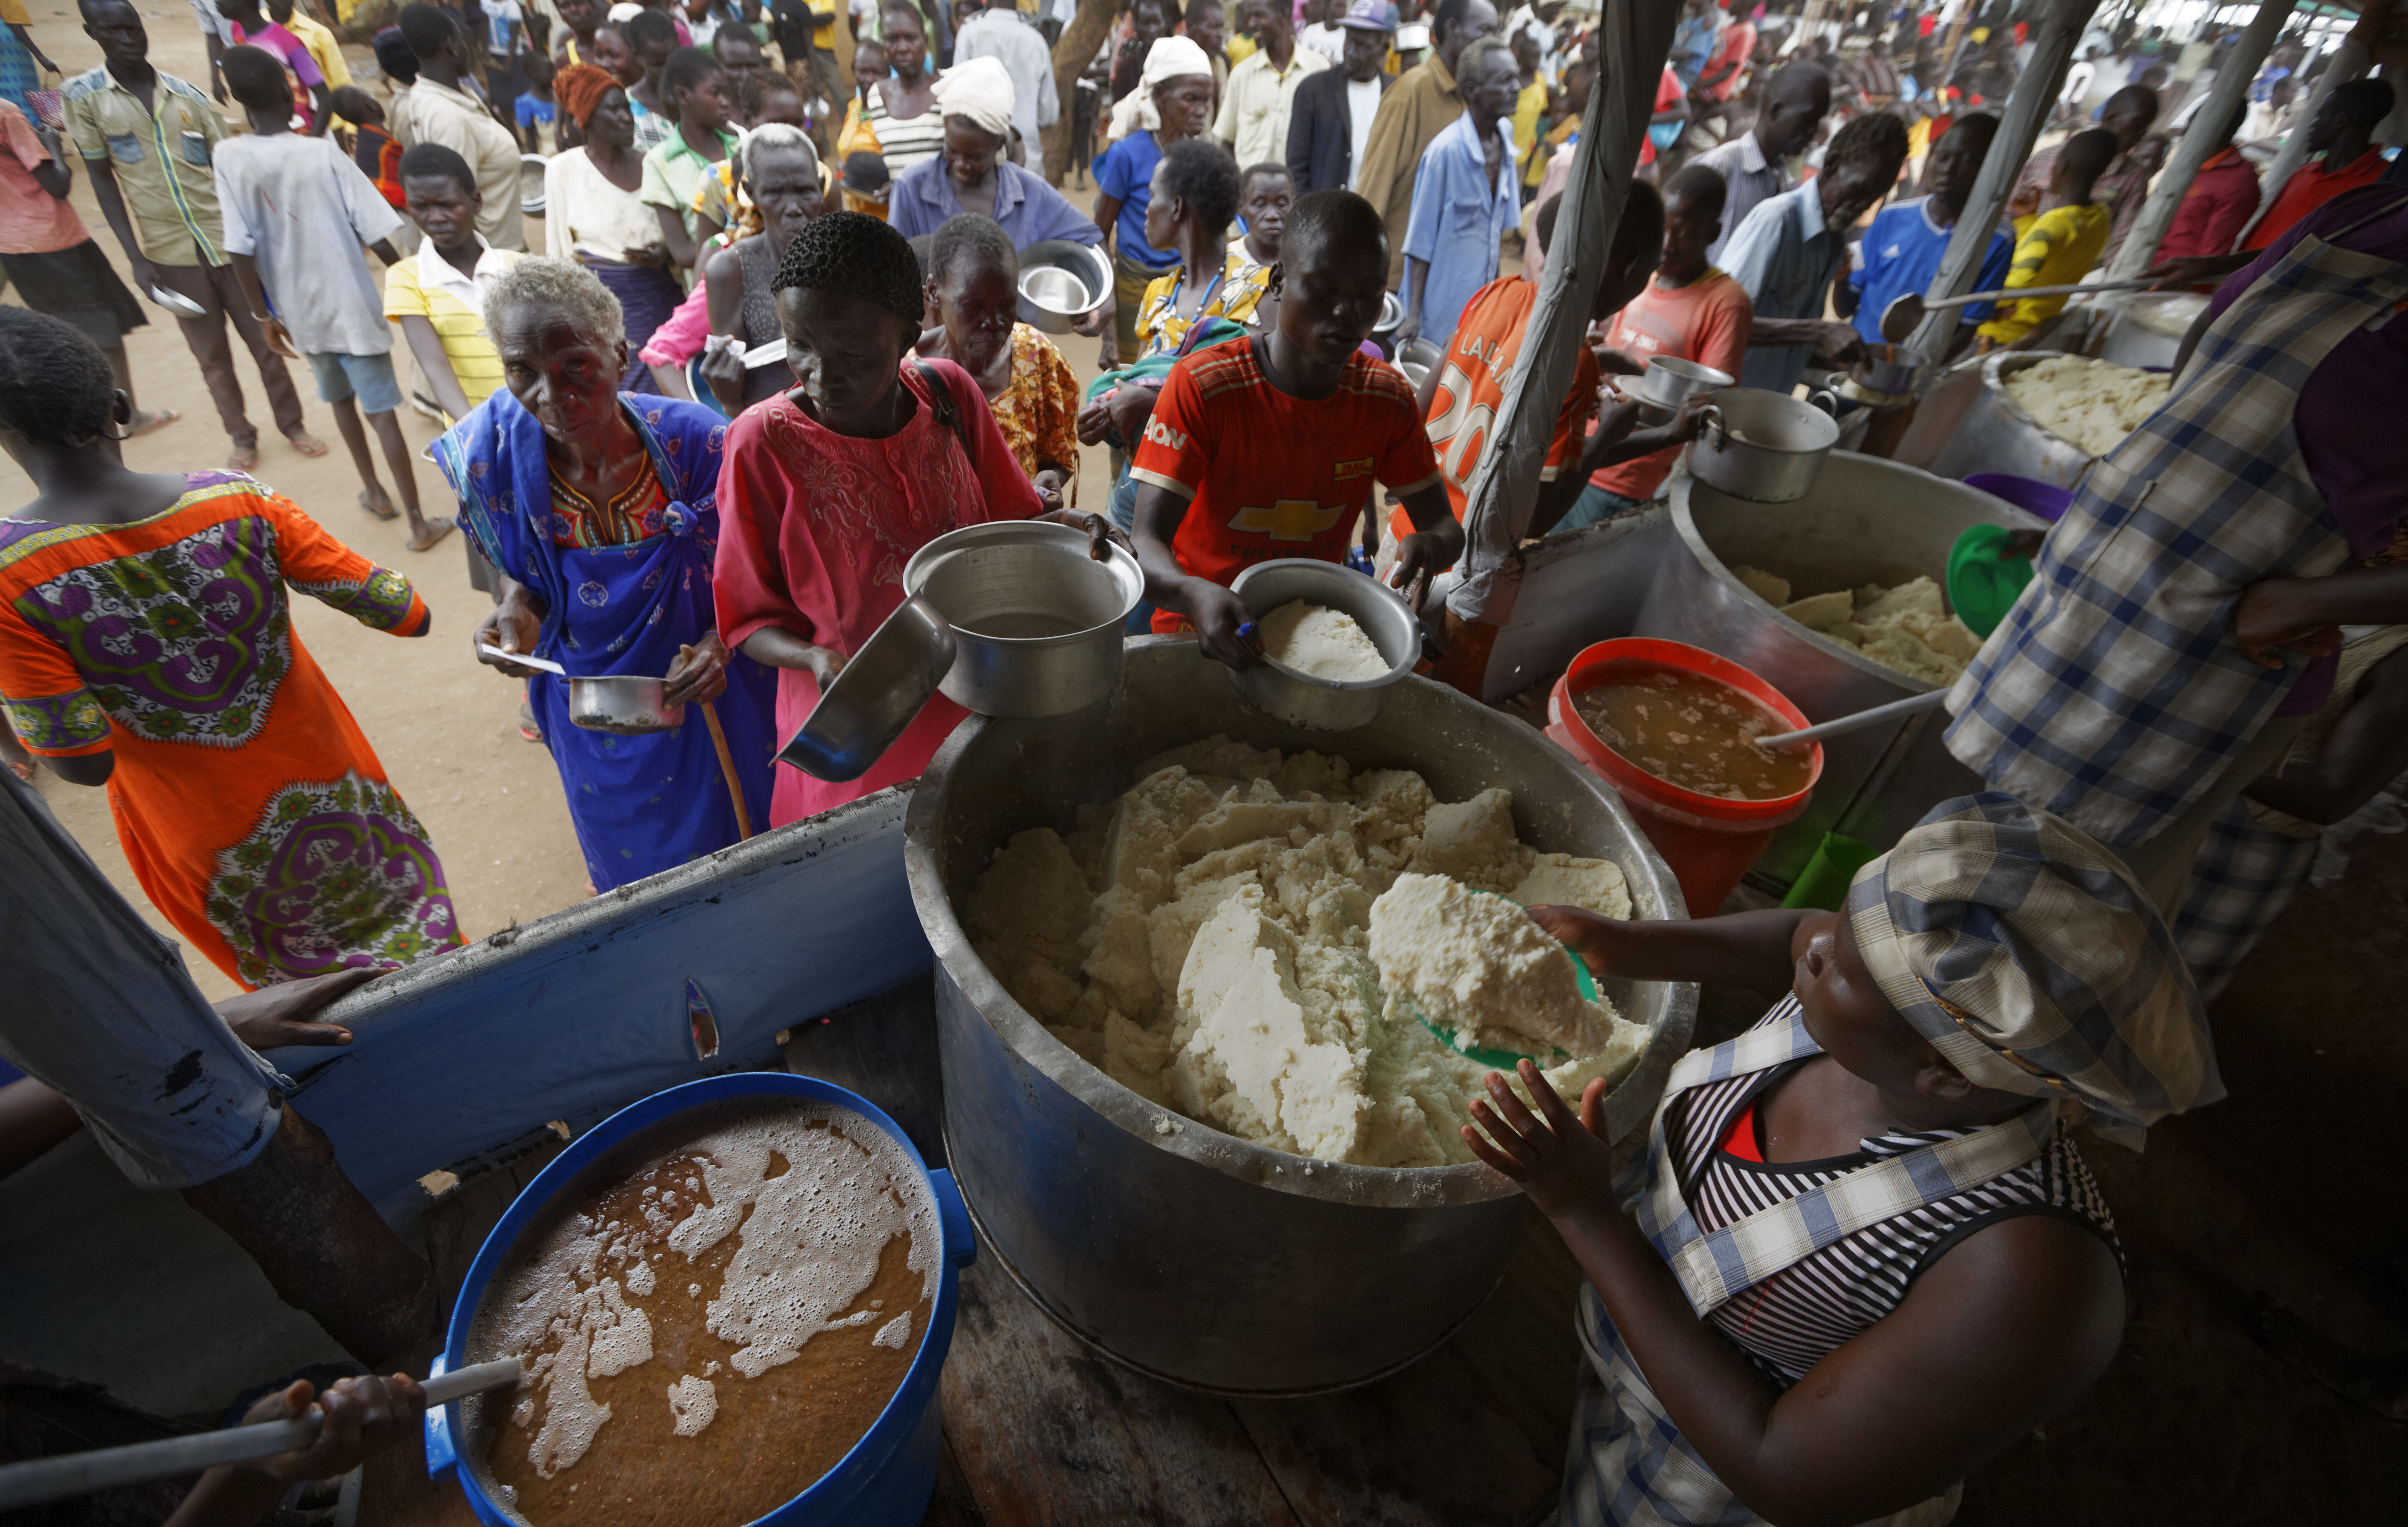 South Sudanese refugees queue to receive a lunch of maize mash and beans, at the Imvepi reception centre, where newly arrived refugees are processed before being allocated plots of land in nearby Bidi Bidi refugee settlement, in northern Uganda, Tuesday, June 6, 2017. Bidi Bidi is a sprawling complex of mud-brick houses that is now the world's largest refugee settlement holding some of those who fled the civil war in South Sudan, which has killed tens of thousands and driven out more than 1.5 million people in the past three years, creating the world's largest refugee crisis. (AP Photo/Ben Curtis)